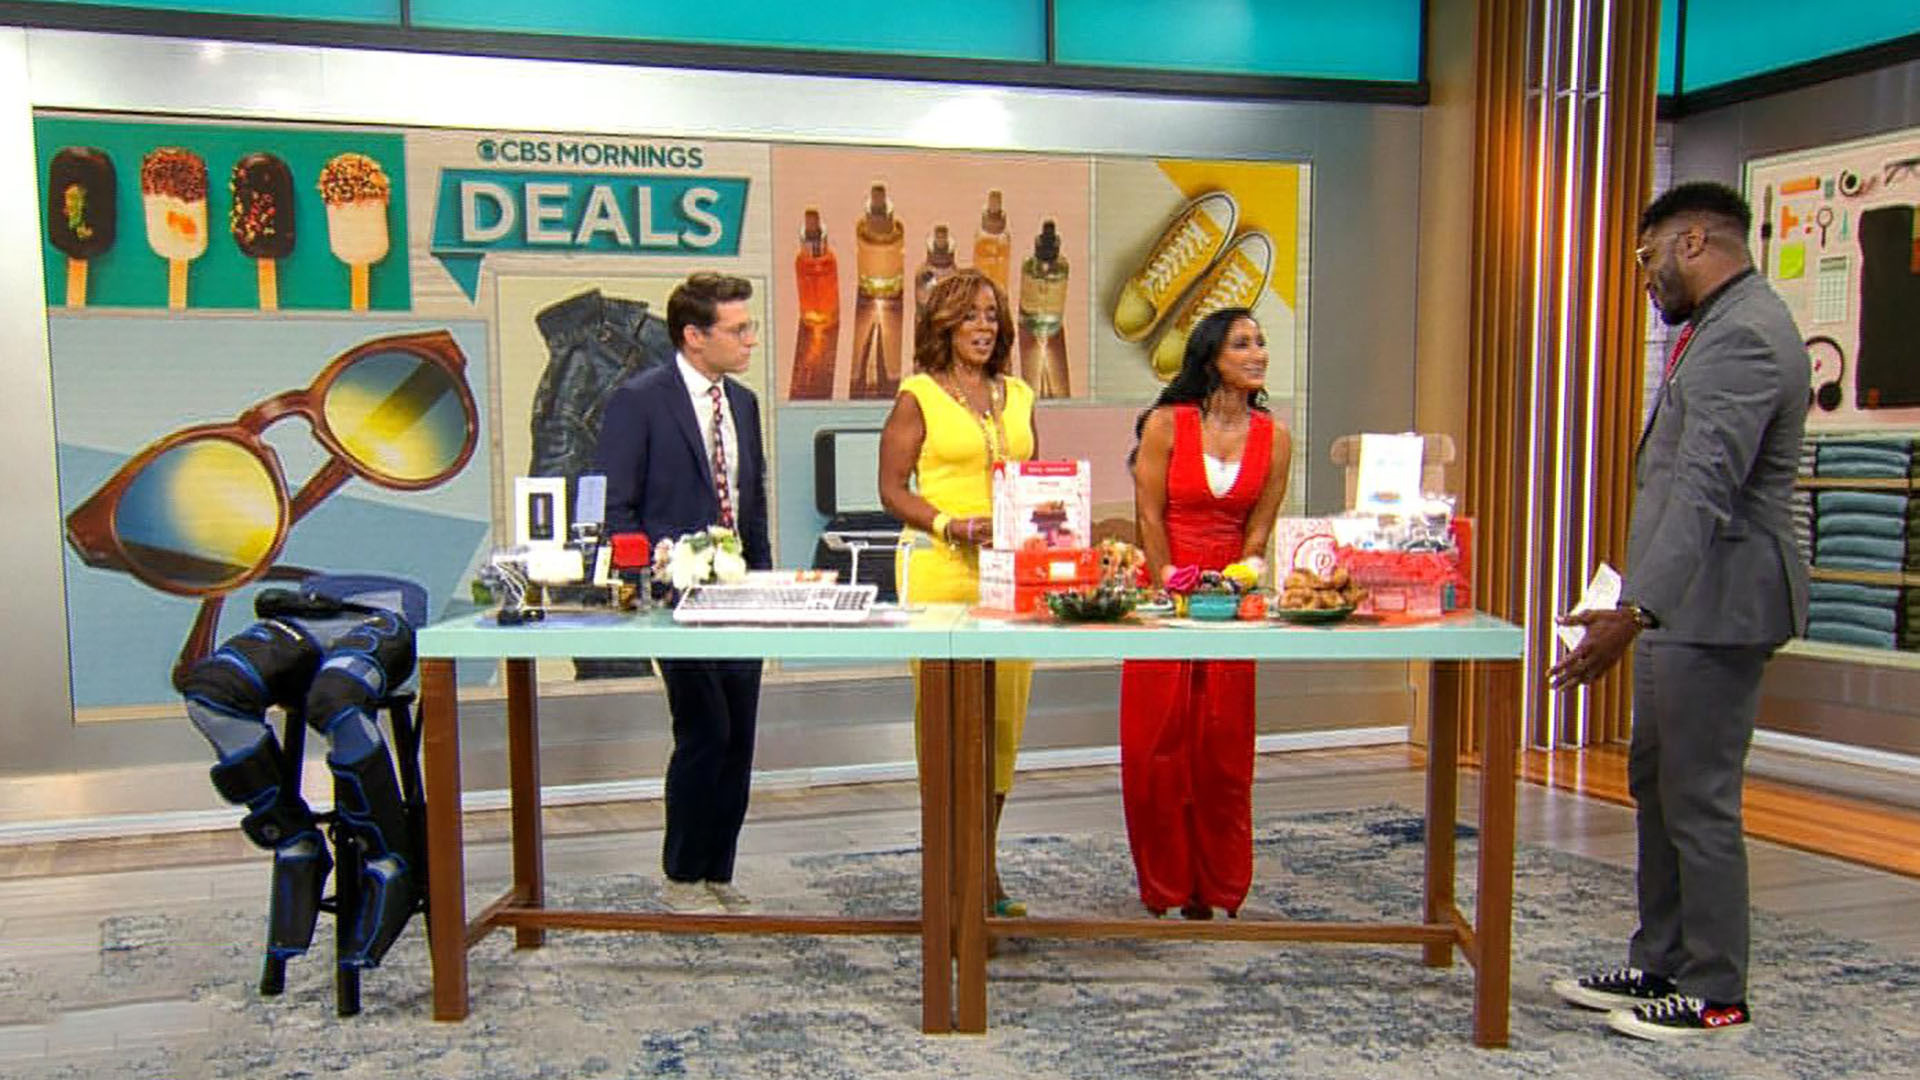 Watch CBS Mornings Where to get the latest CBS Mornings Deals